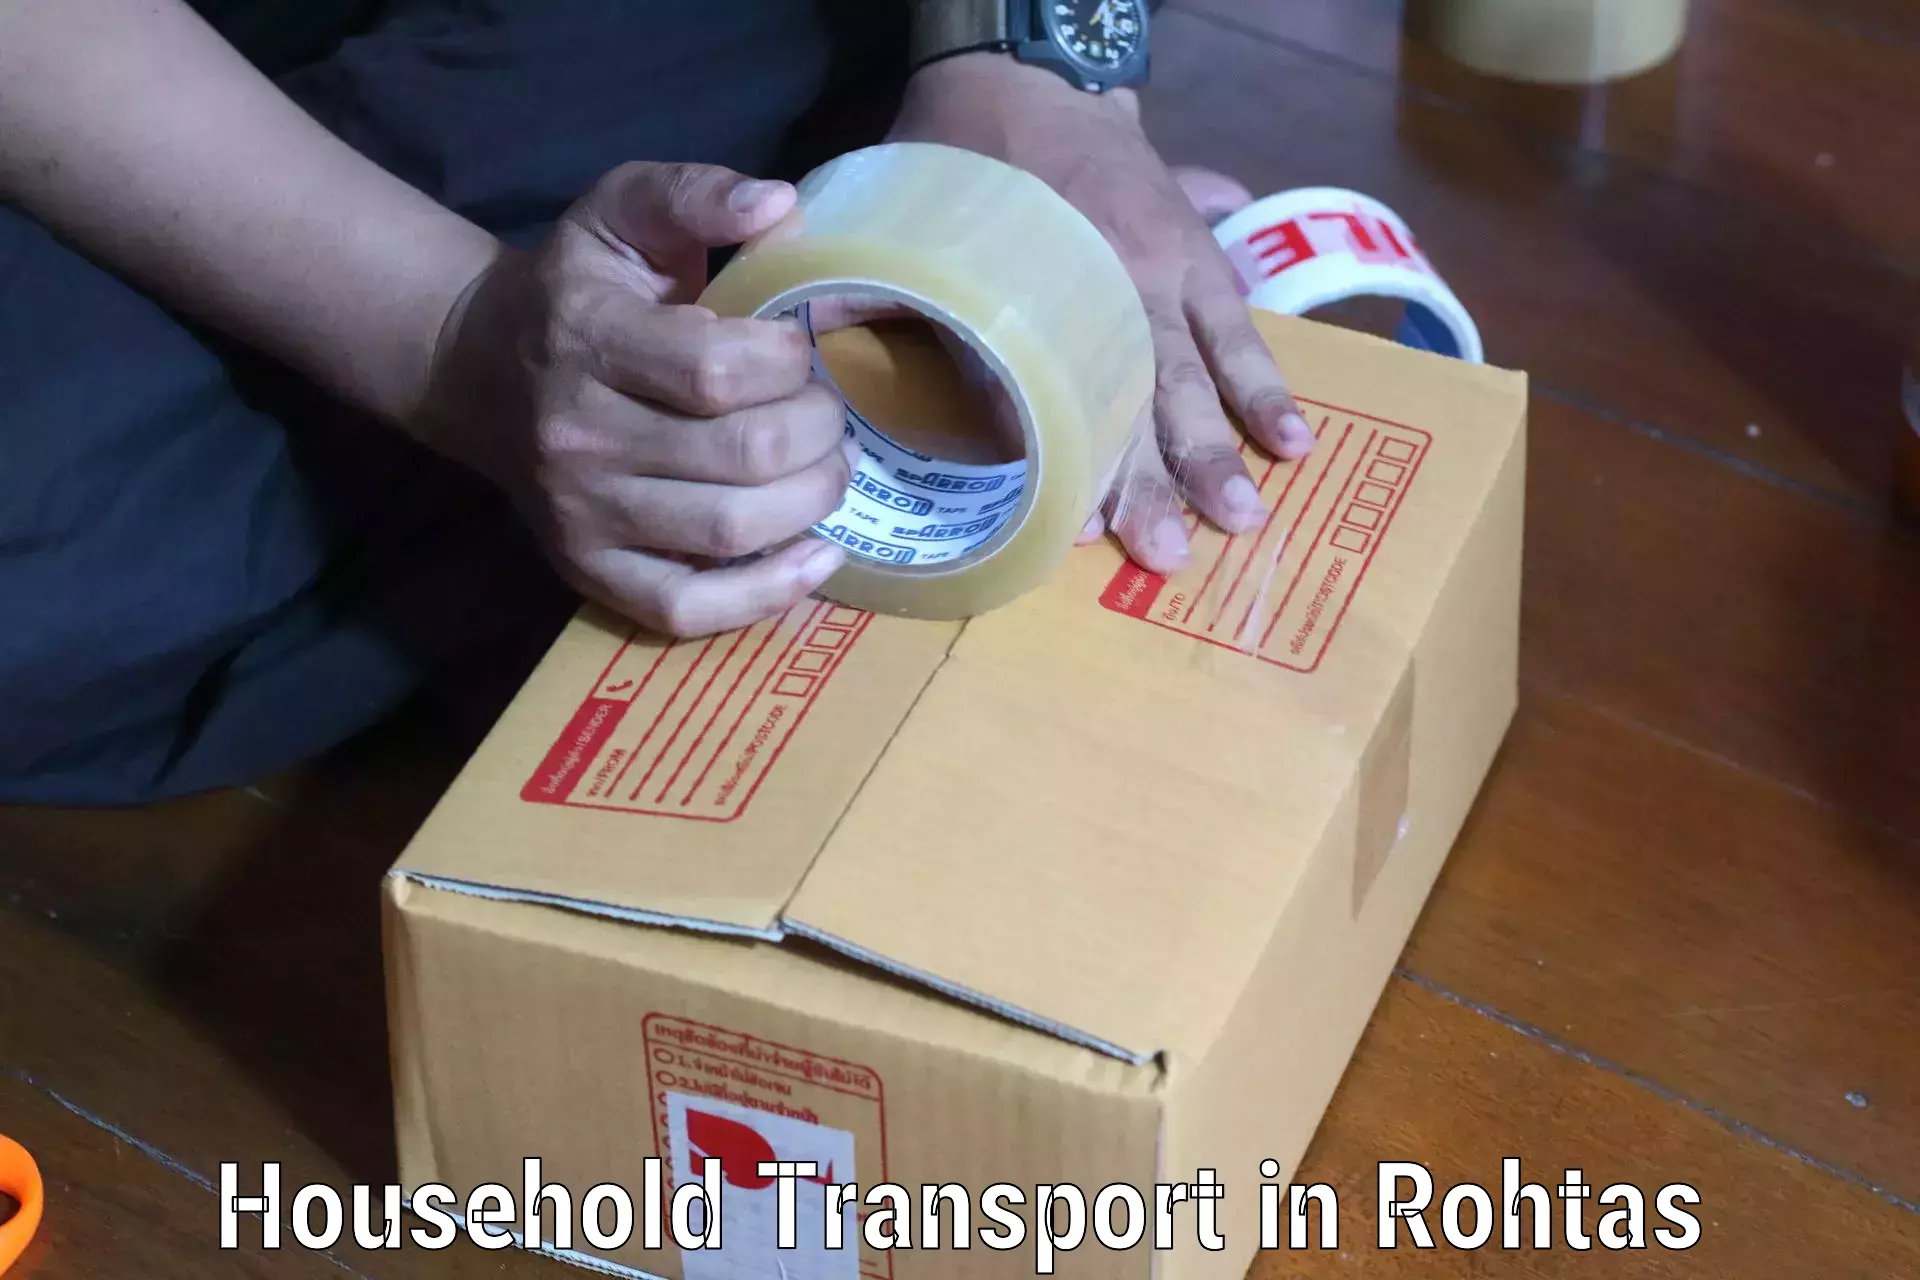 Household transport experts in Rohtas